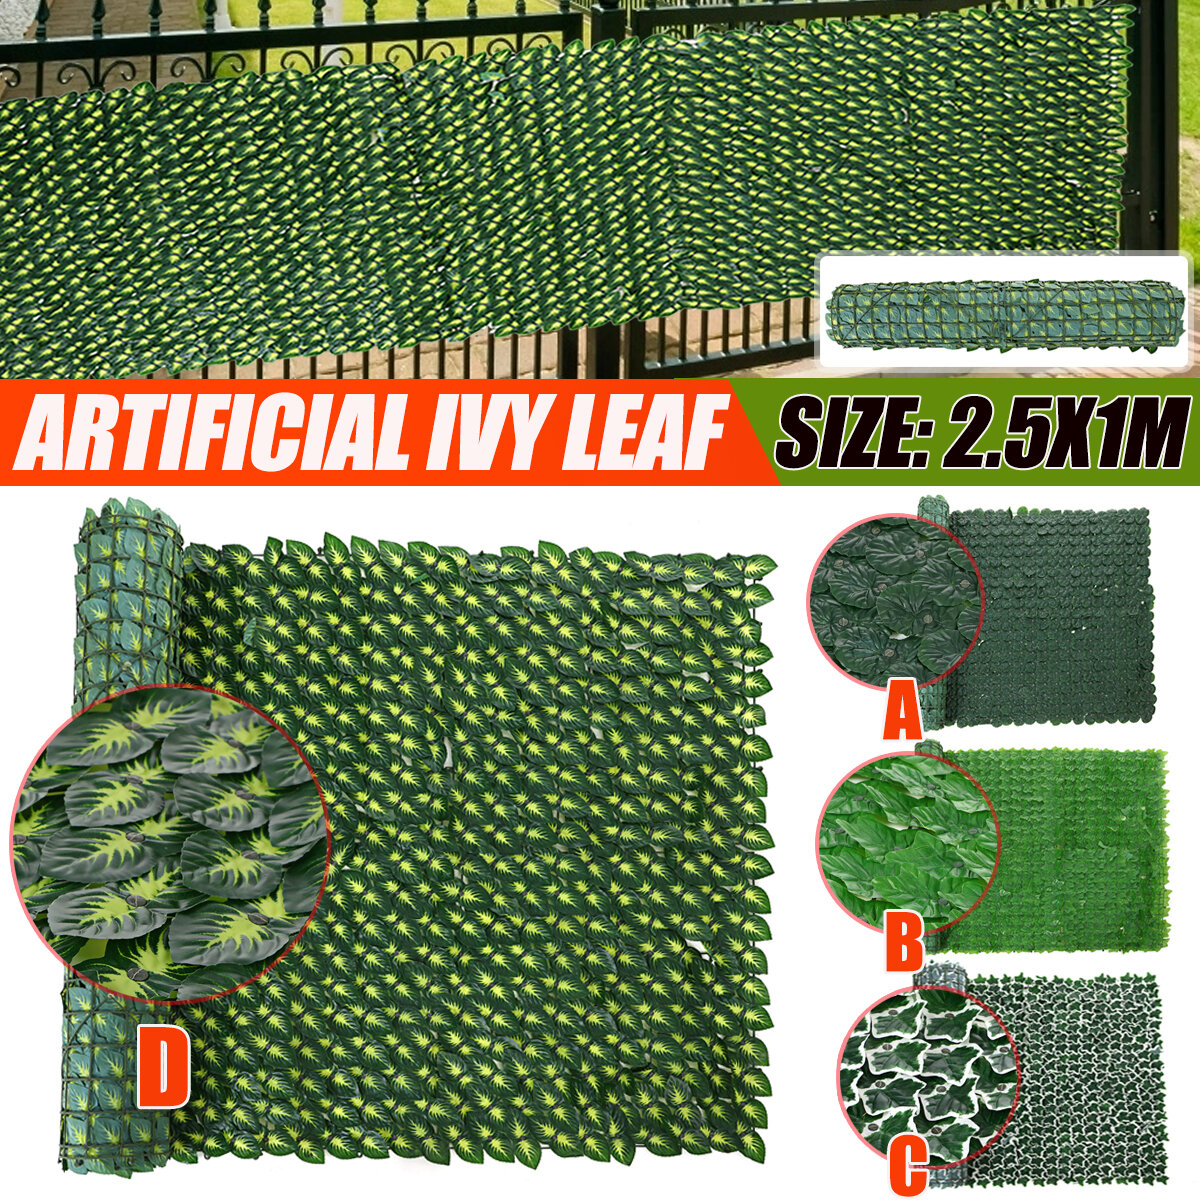 2.5X1M Artificial Faux Ivy Leaf Privacy Fence Screen Hedge Decor Panels Garden Outdoor